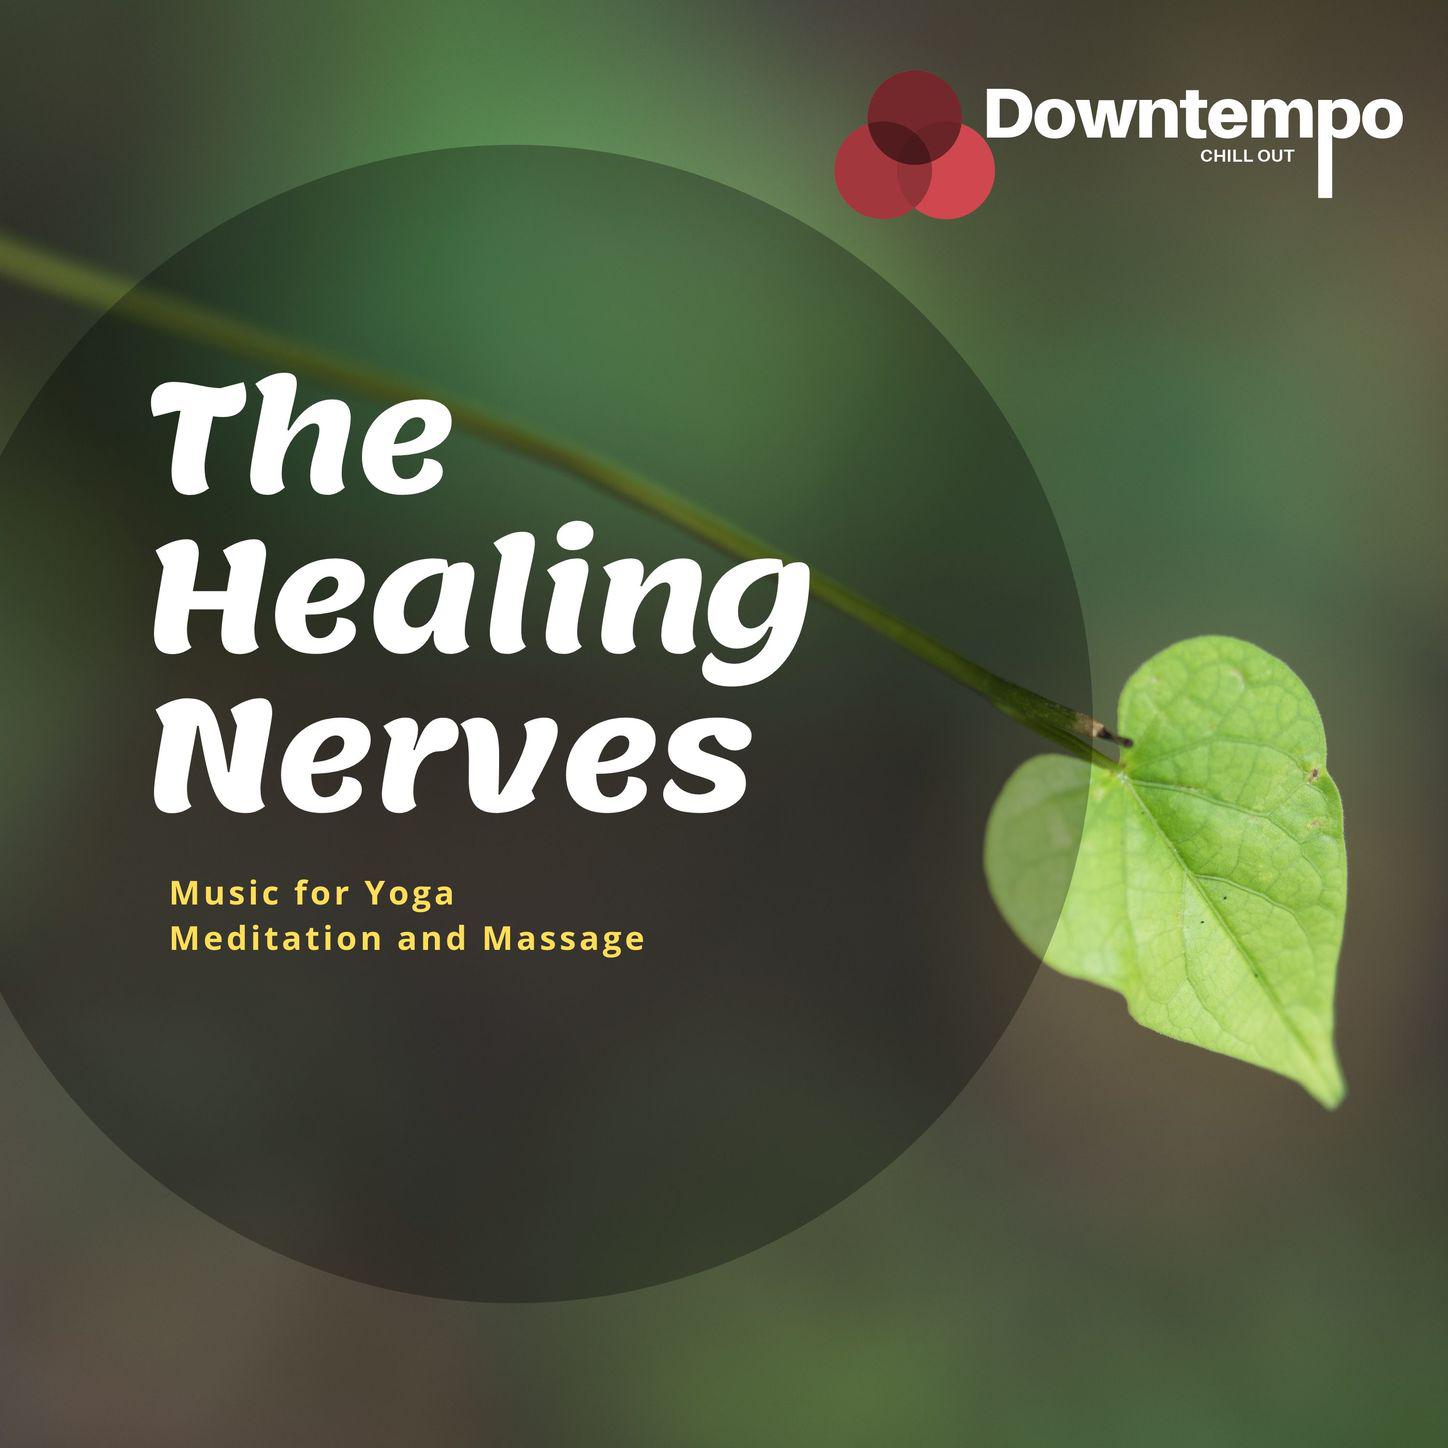 The Healing Nerves: Music for Yoga Meditation and Massage